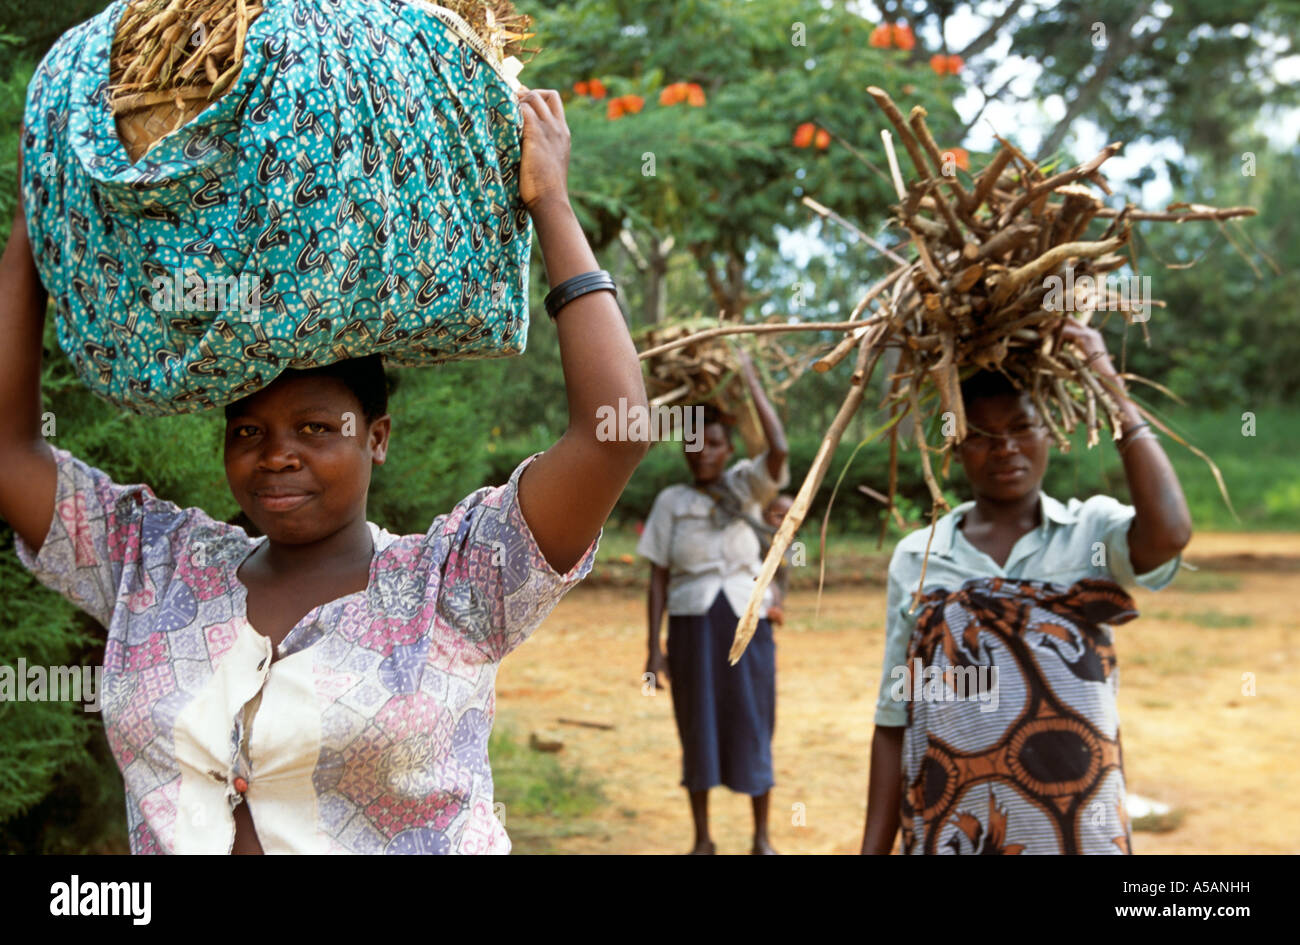 Women carrying twigs and wood on head, Malawi,  Africa Stock Photo